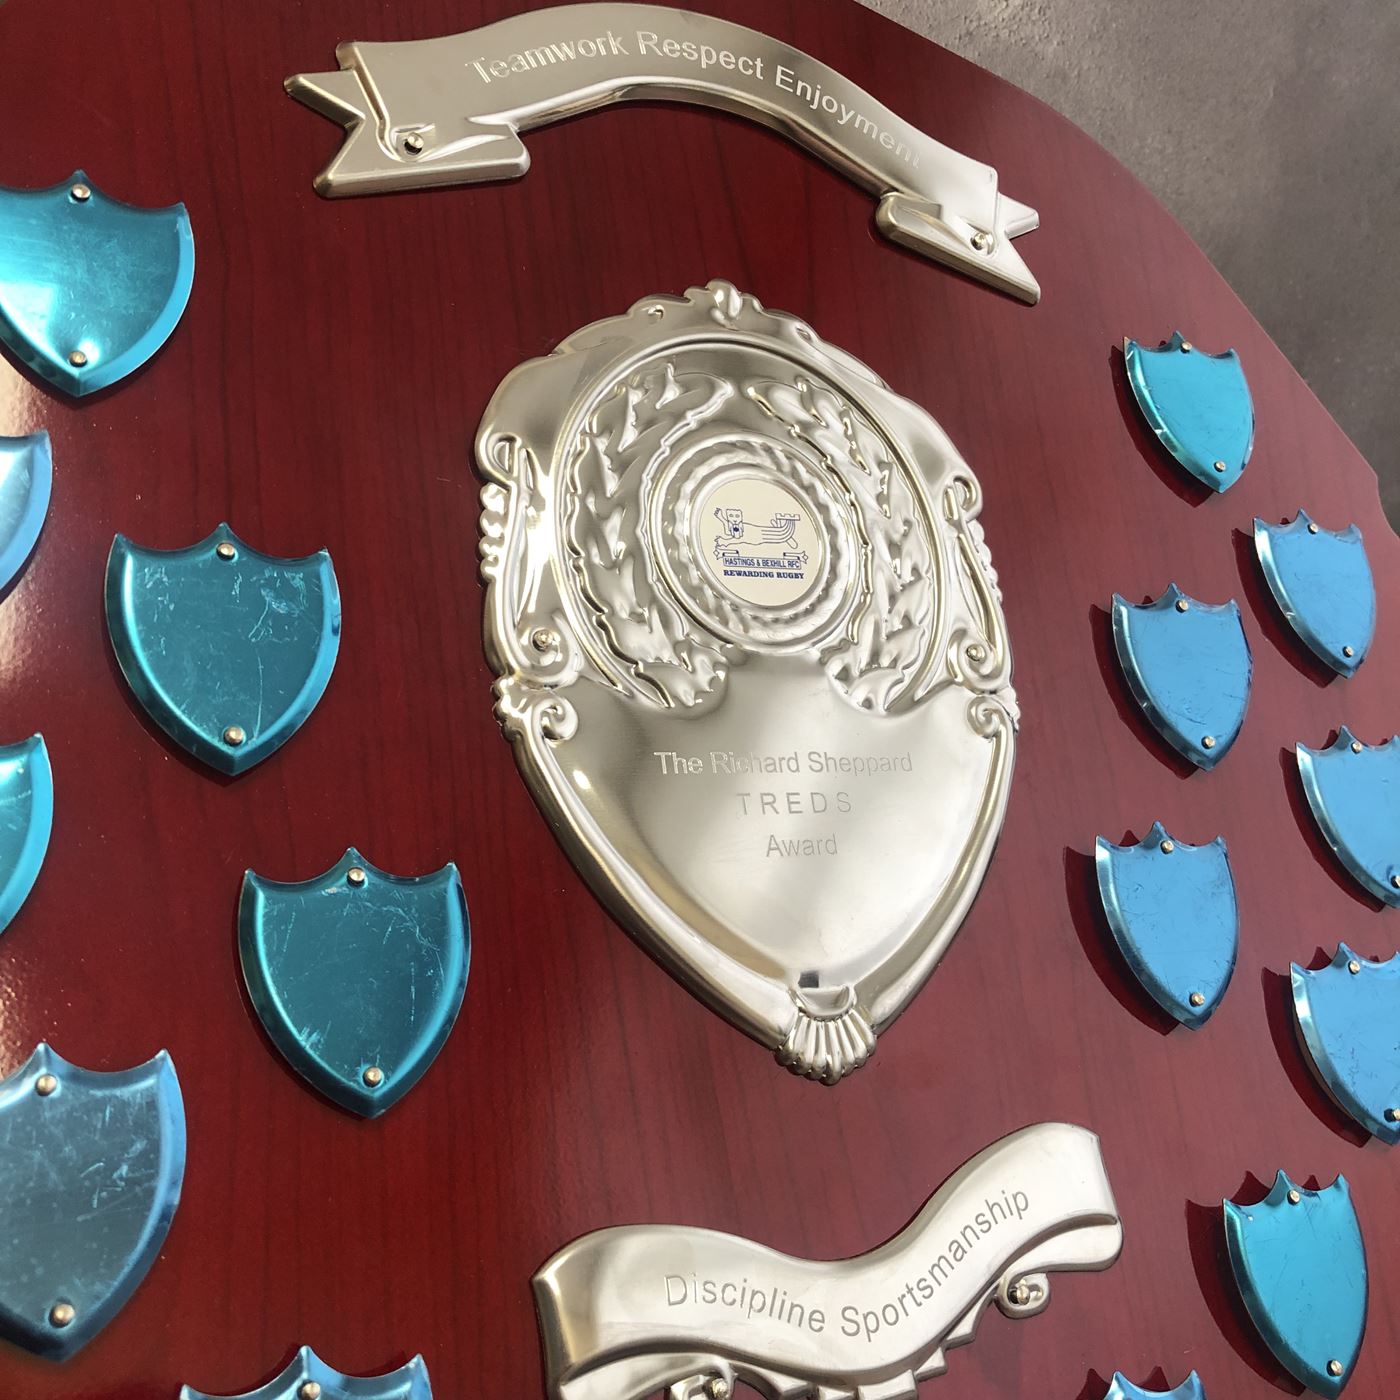 English Rose Annual Shield Award with 17 Side Shields